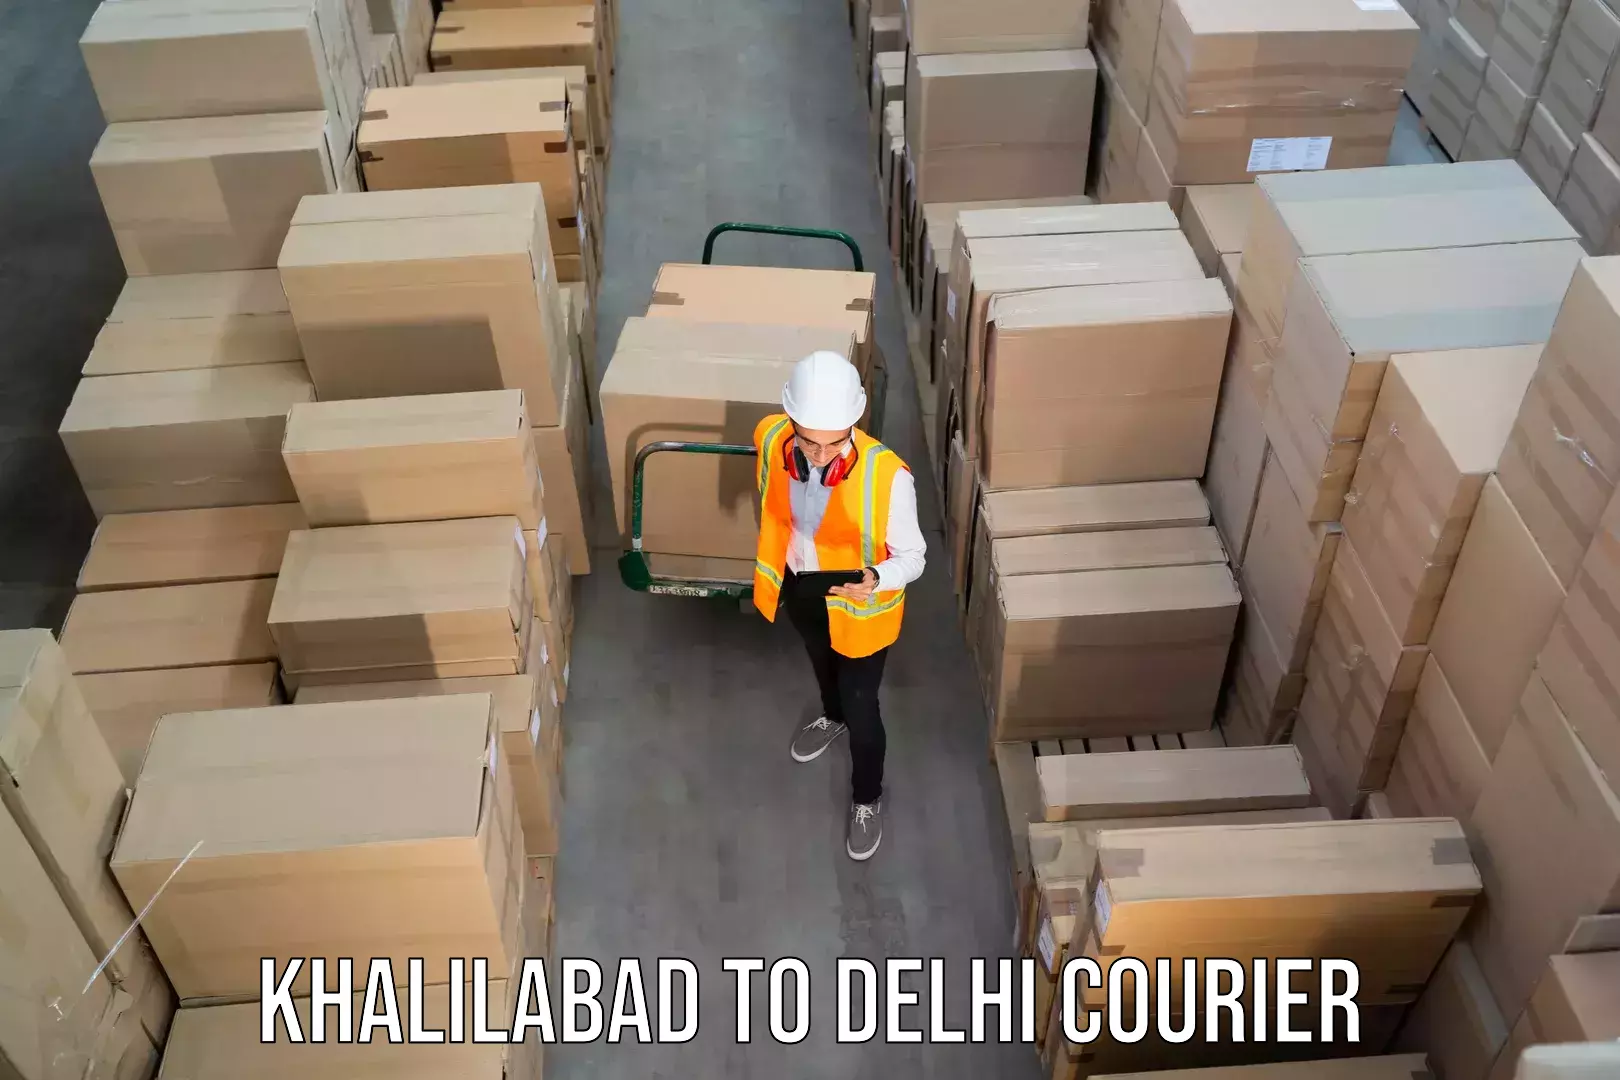 24/7 shipping services Khalilabad to NCR